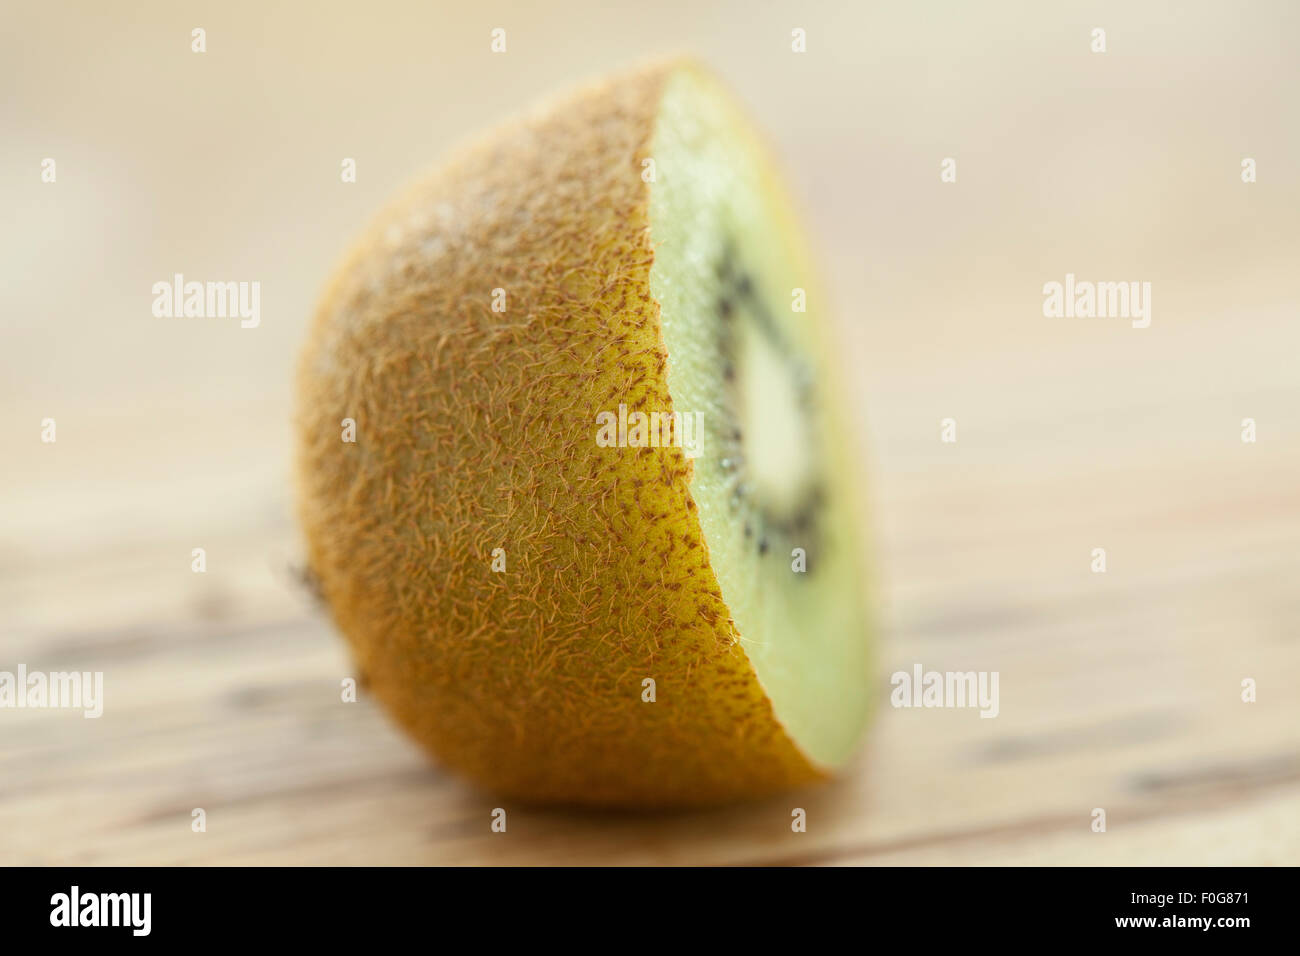 A sliced kiwifruit or kiwi on a wooden surface photographed with window light. Stock Photo